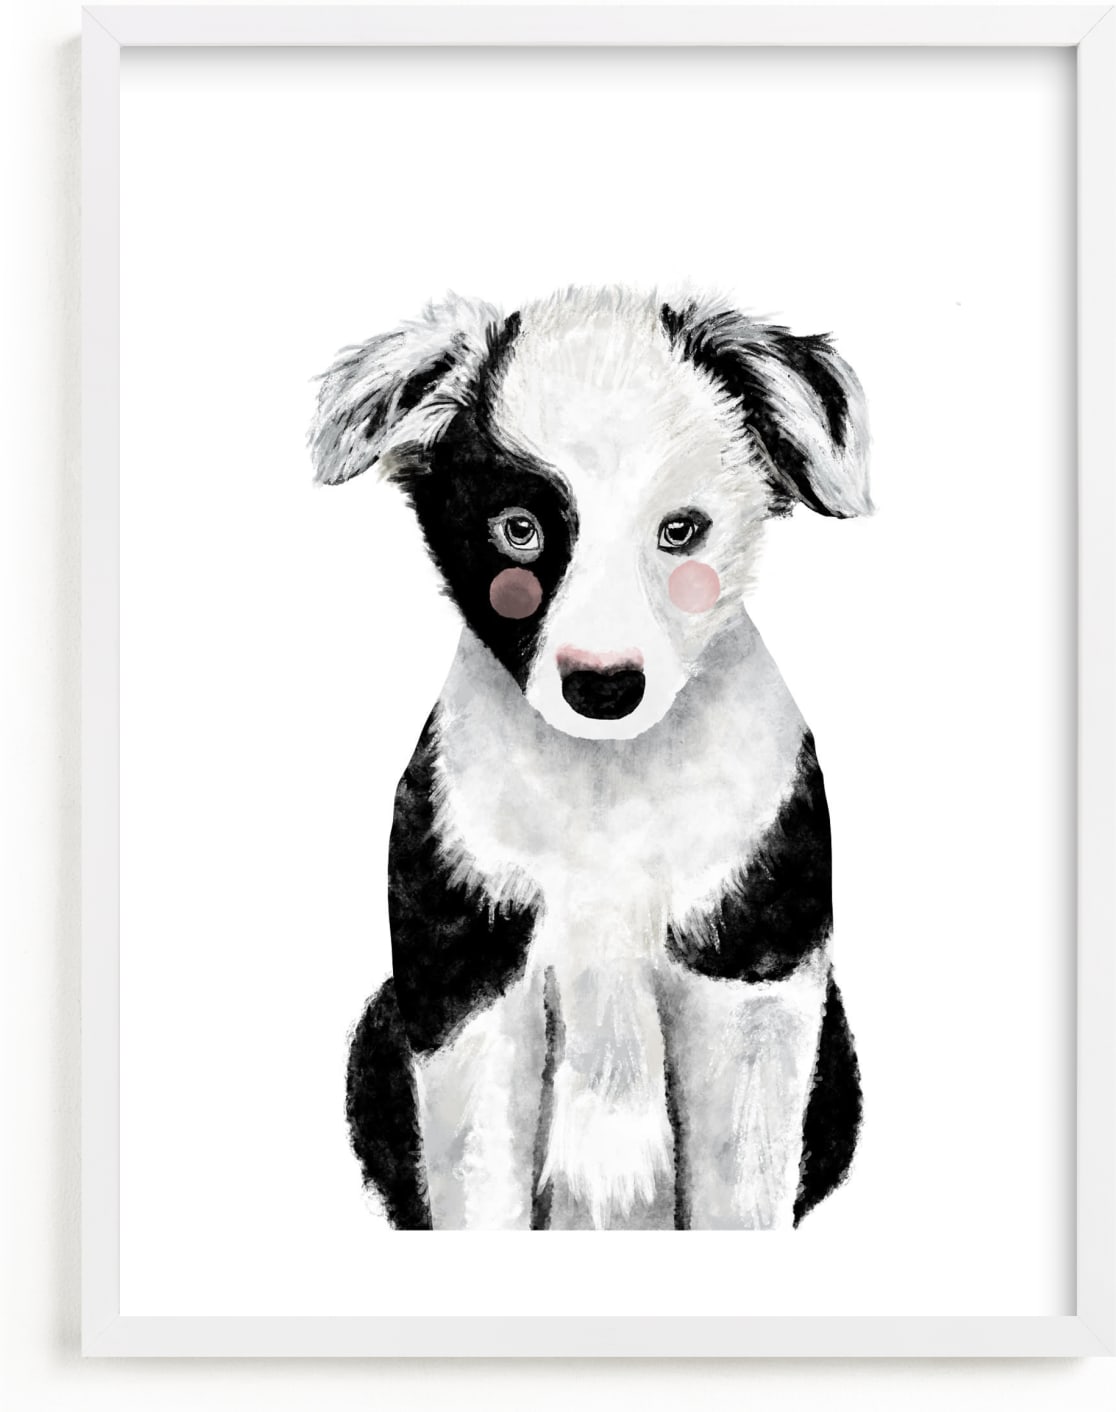 This is a black and white art by Cass Loh called Baby Animal Dog.